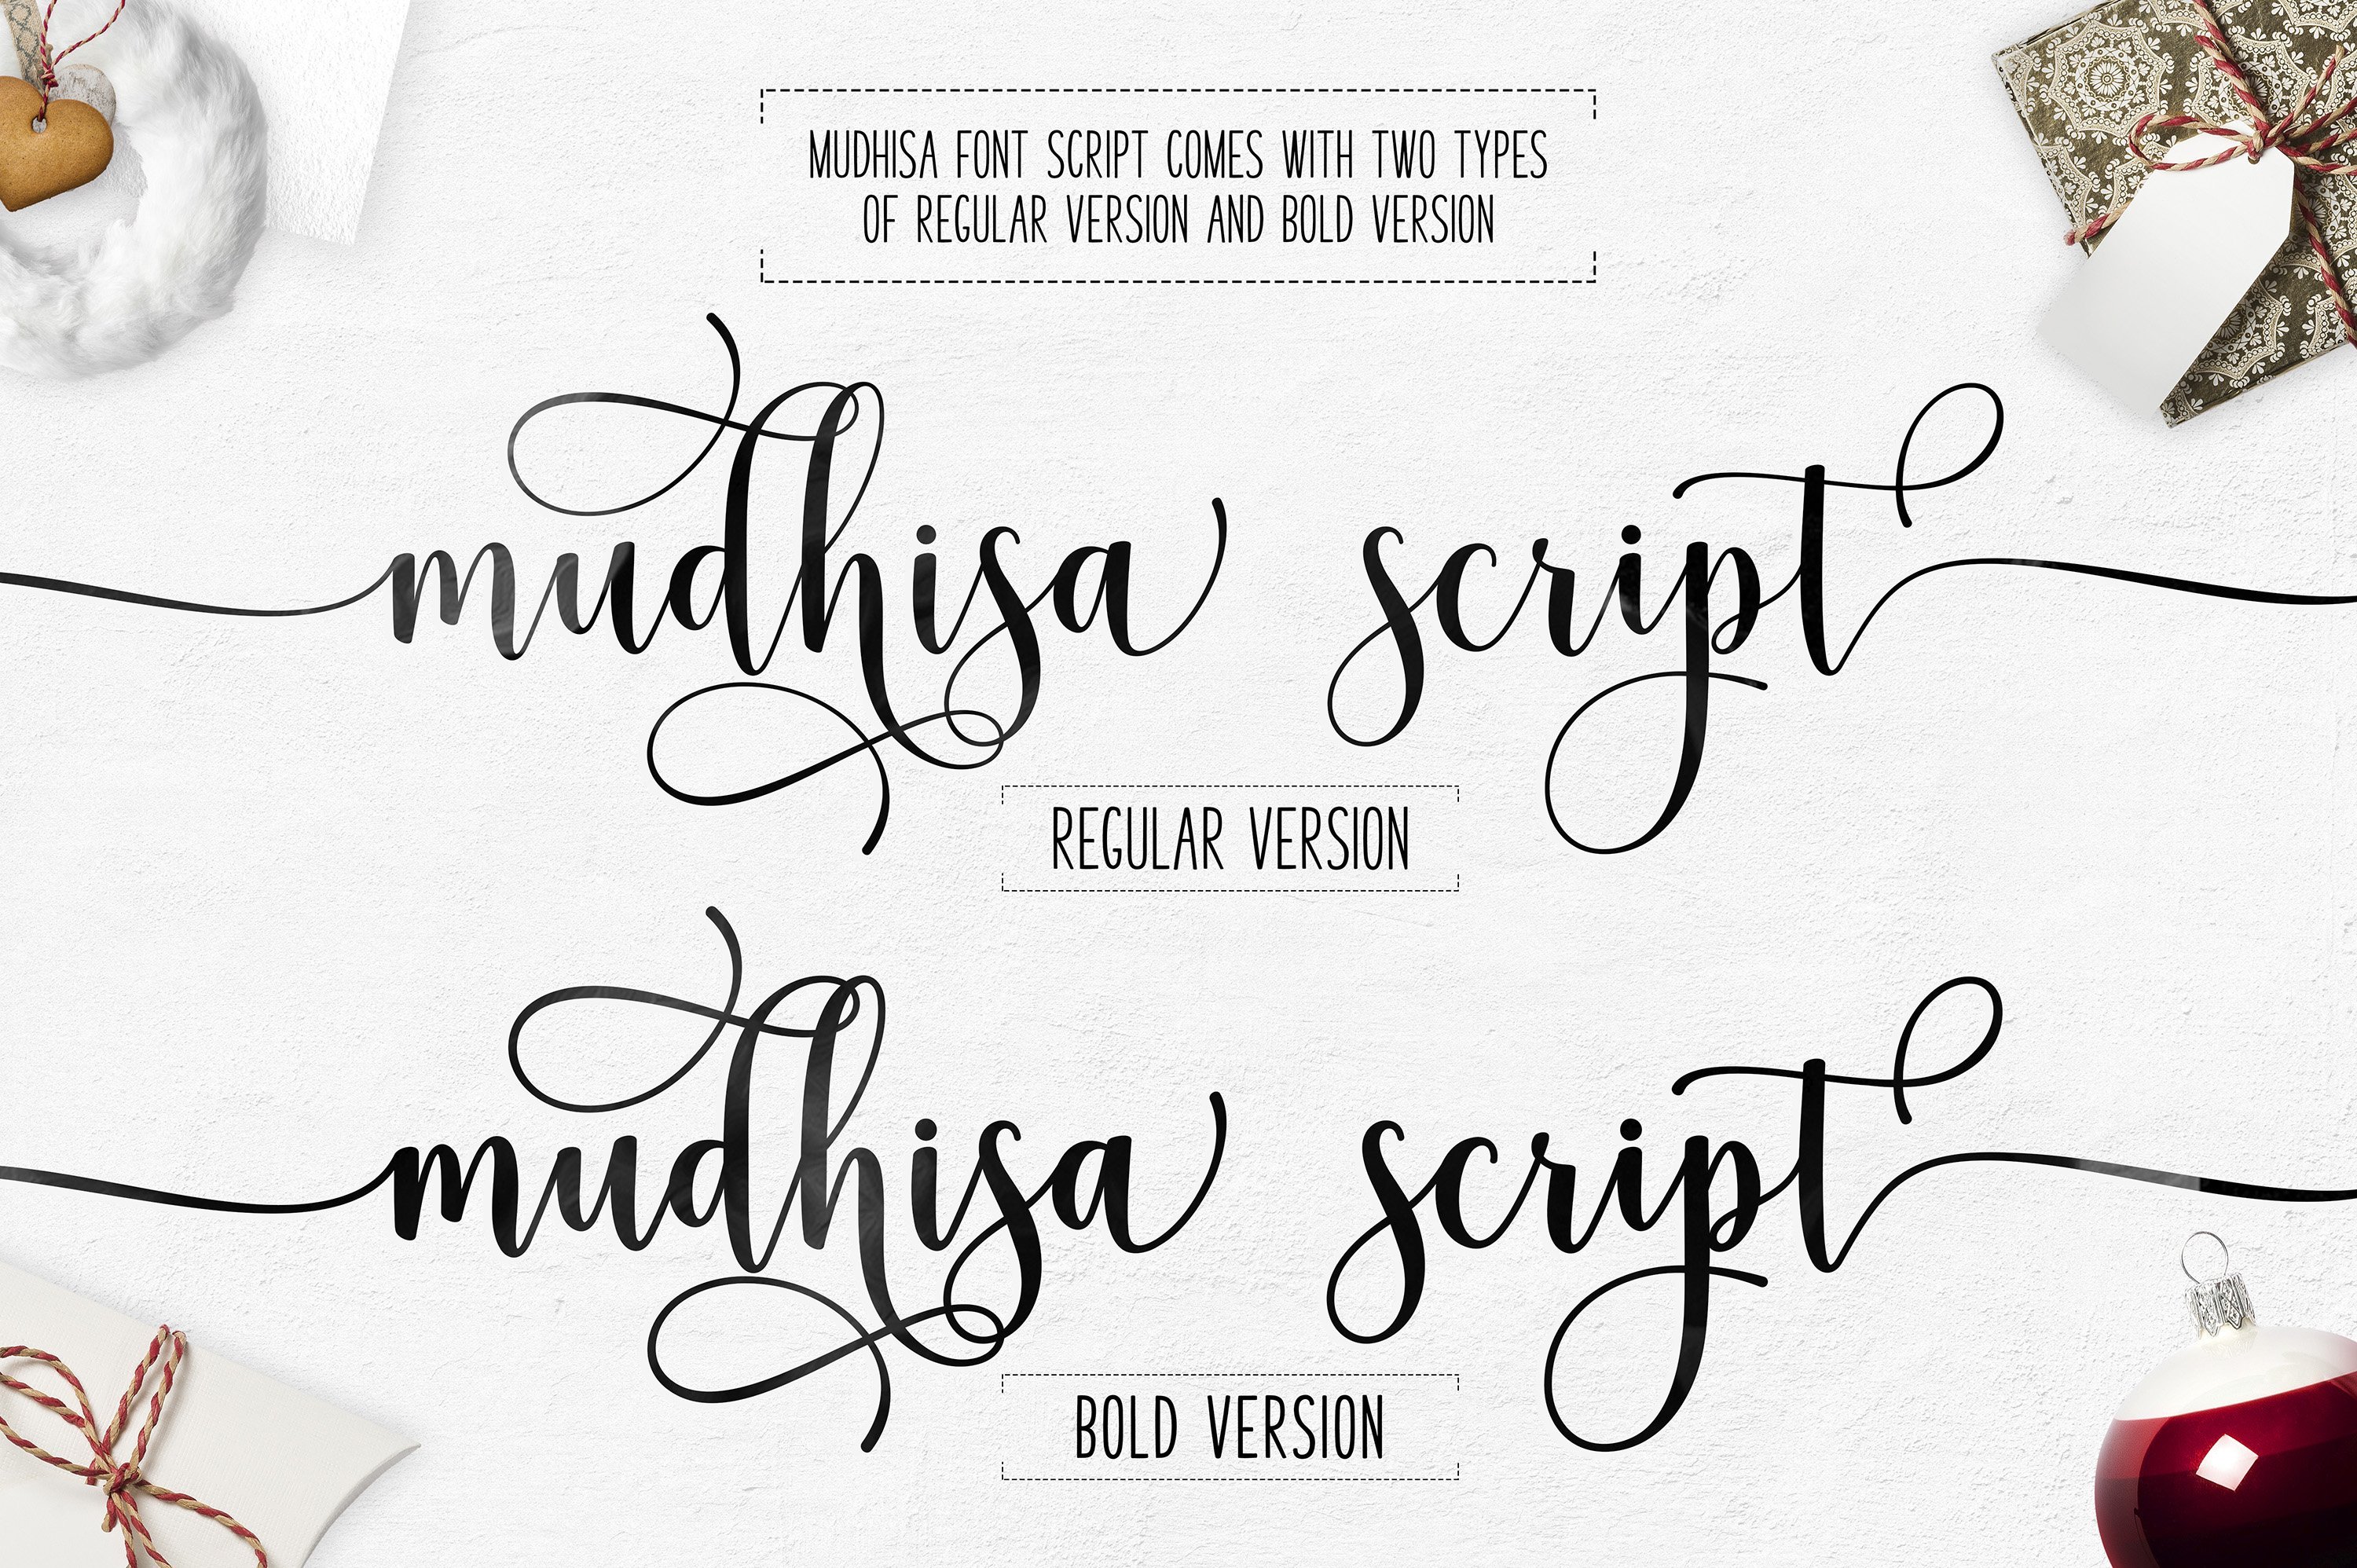 Two types of  Mudnisa font.